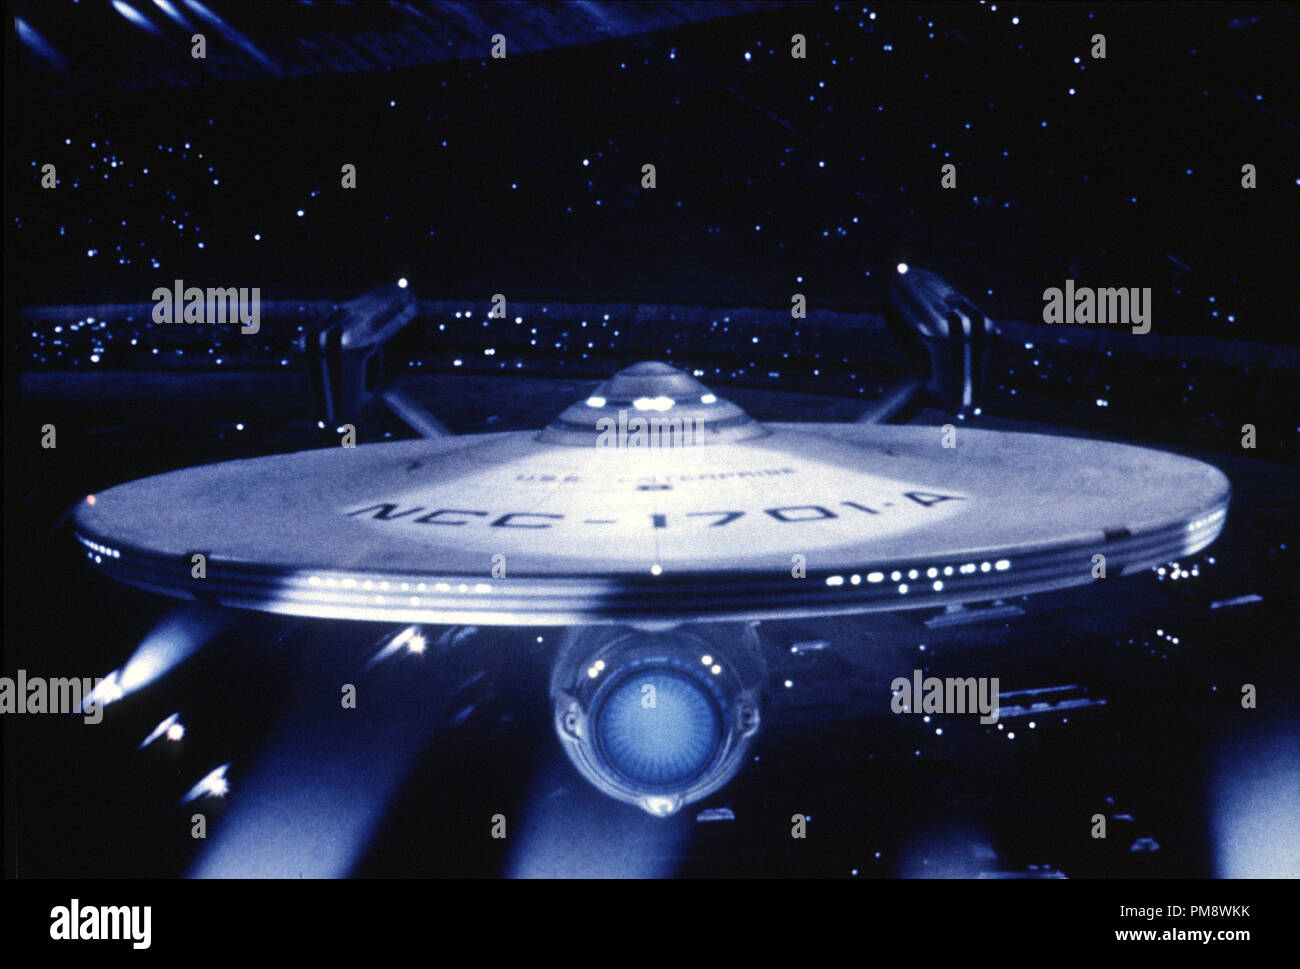 Studio Publicity Still from 'Star Trek: The Motion Picture' The Enterprise © 1979 Paramount All Rights Reserved   File Reference # 31718070THA  For Editorial Use Only Stock Photo